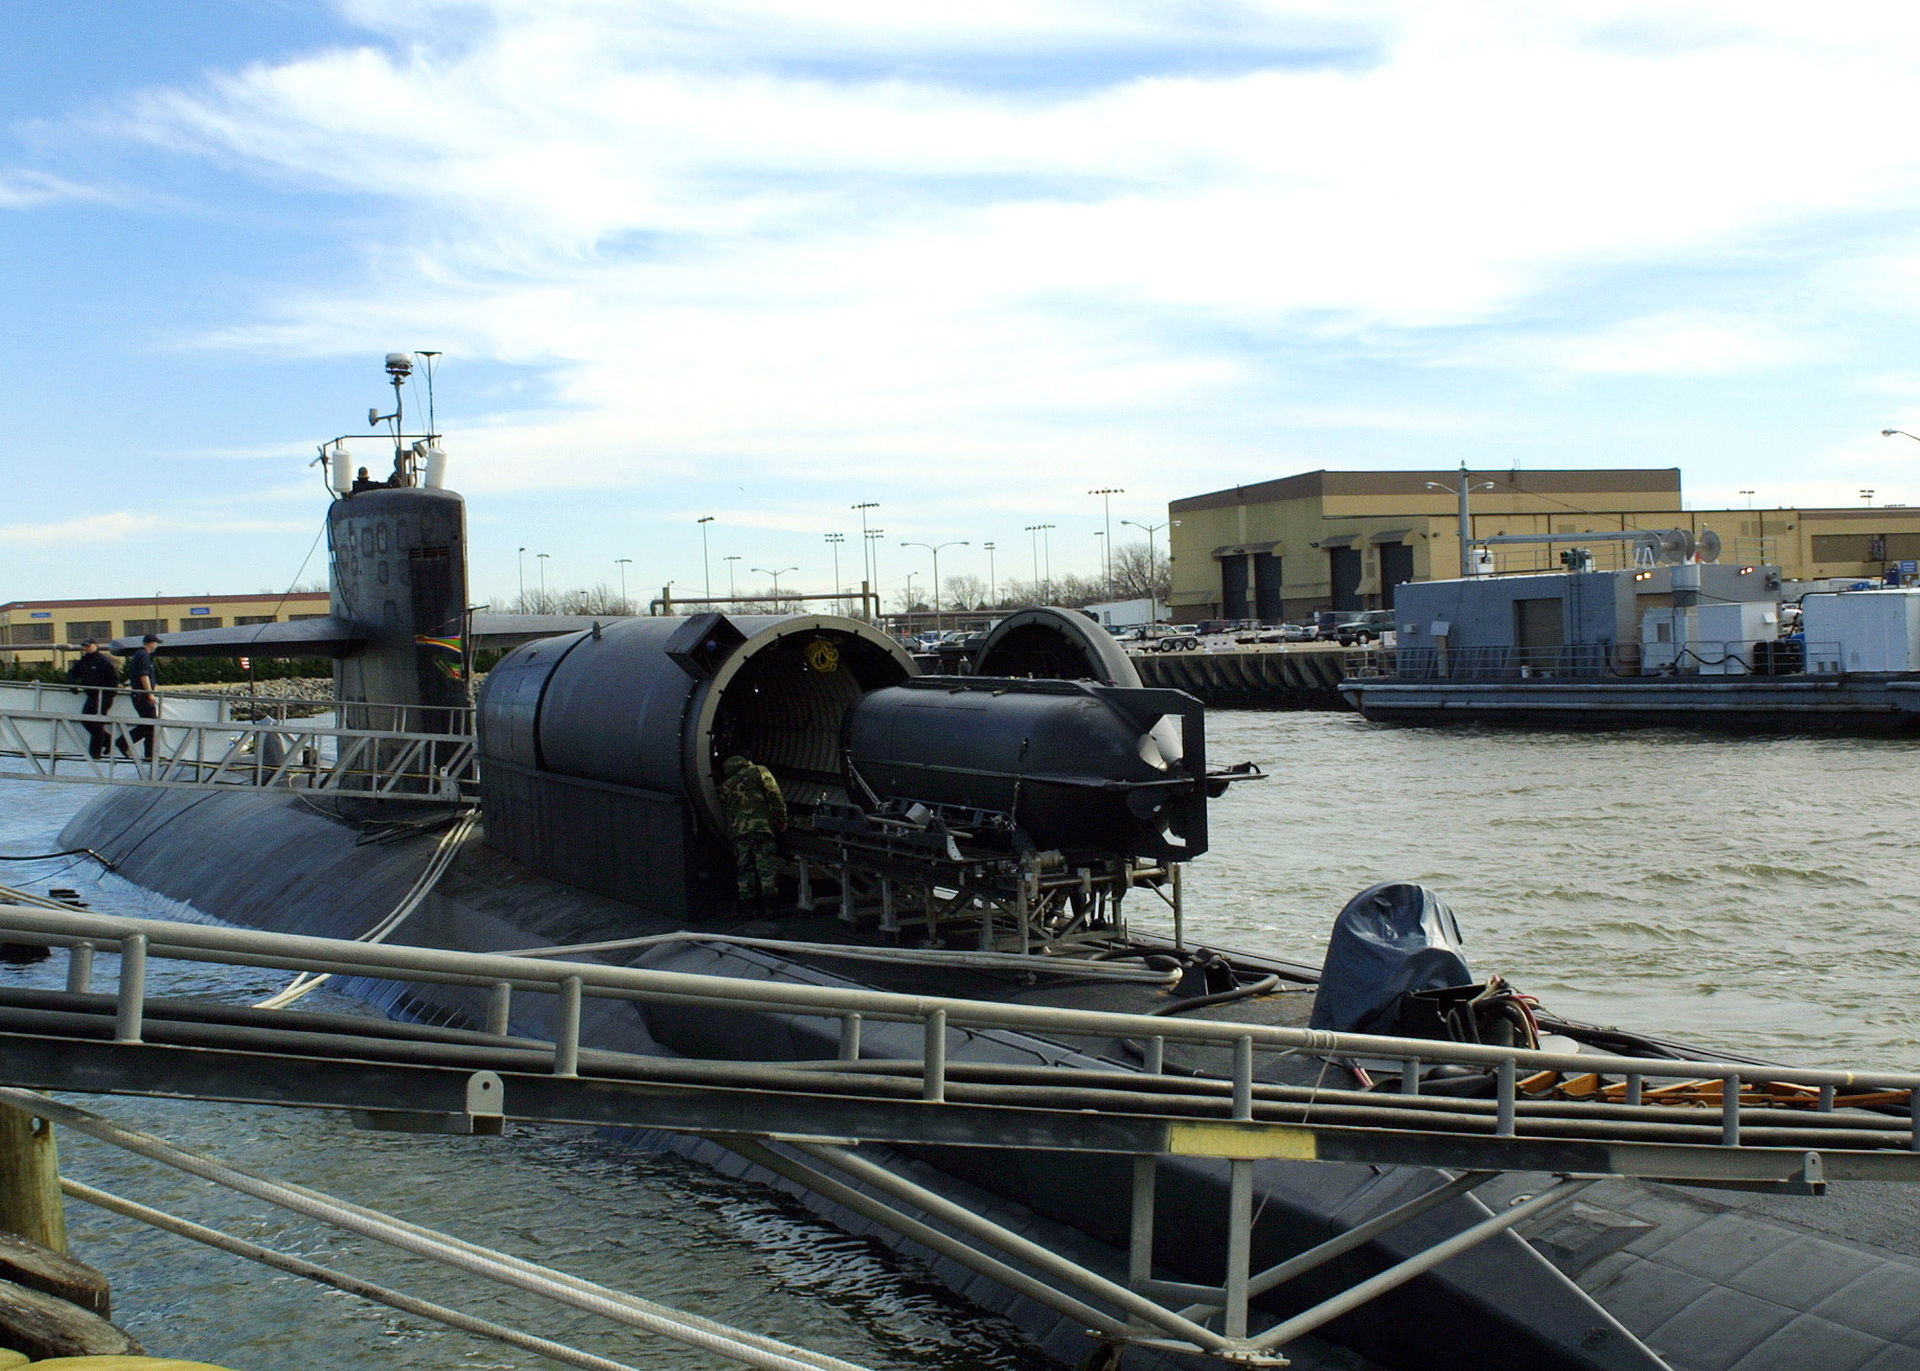 A U.S. Navy Seal Delivery Vehicle onboard Los Angeles-class attack submarine USS Dallas. US Navy Photo